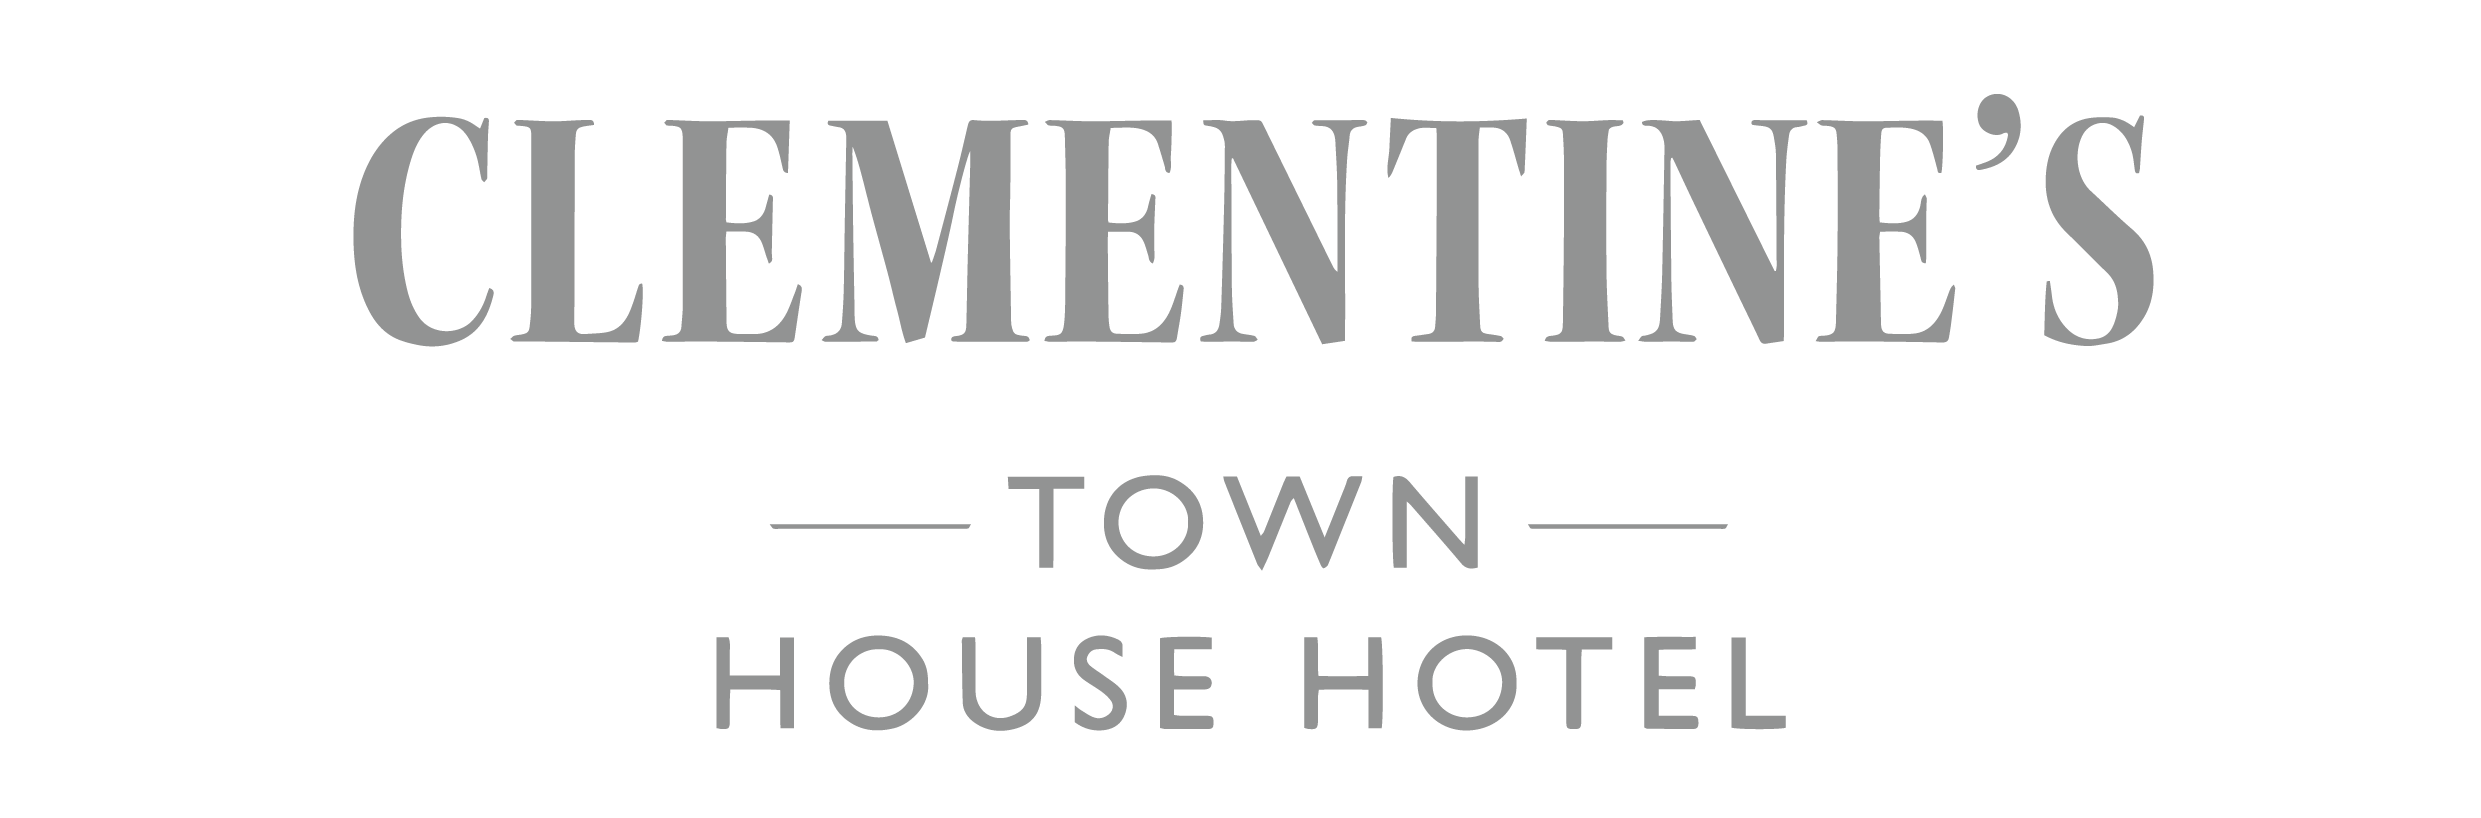 Clementines Town House Hotel logo